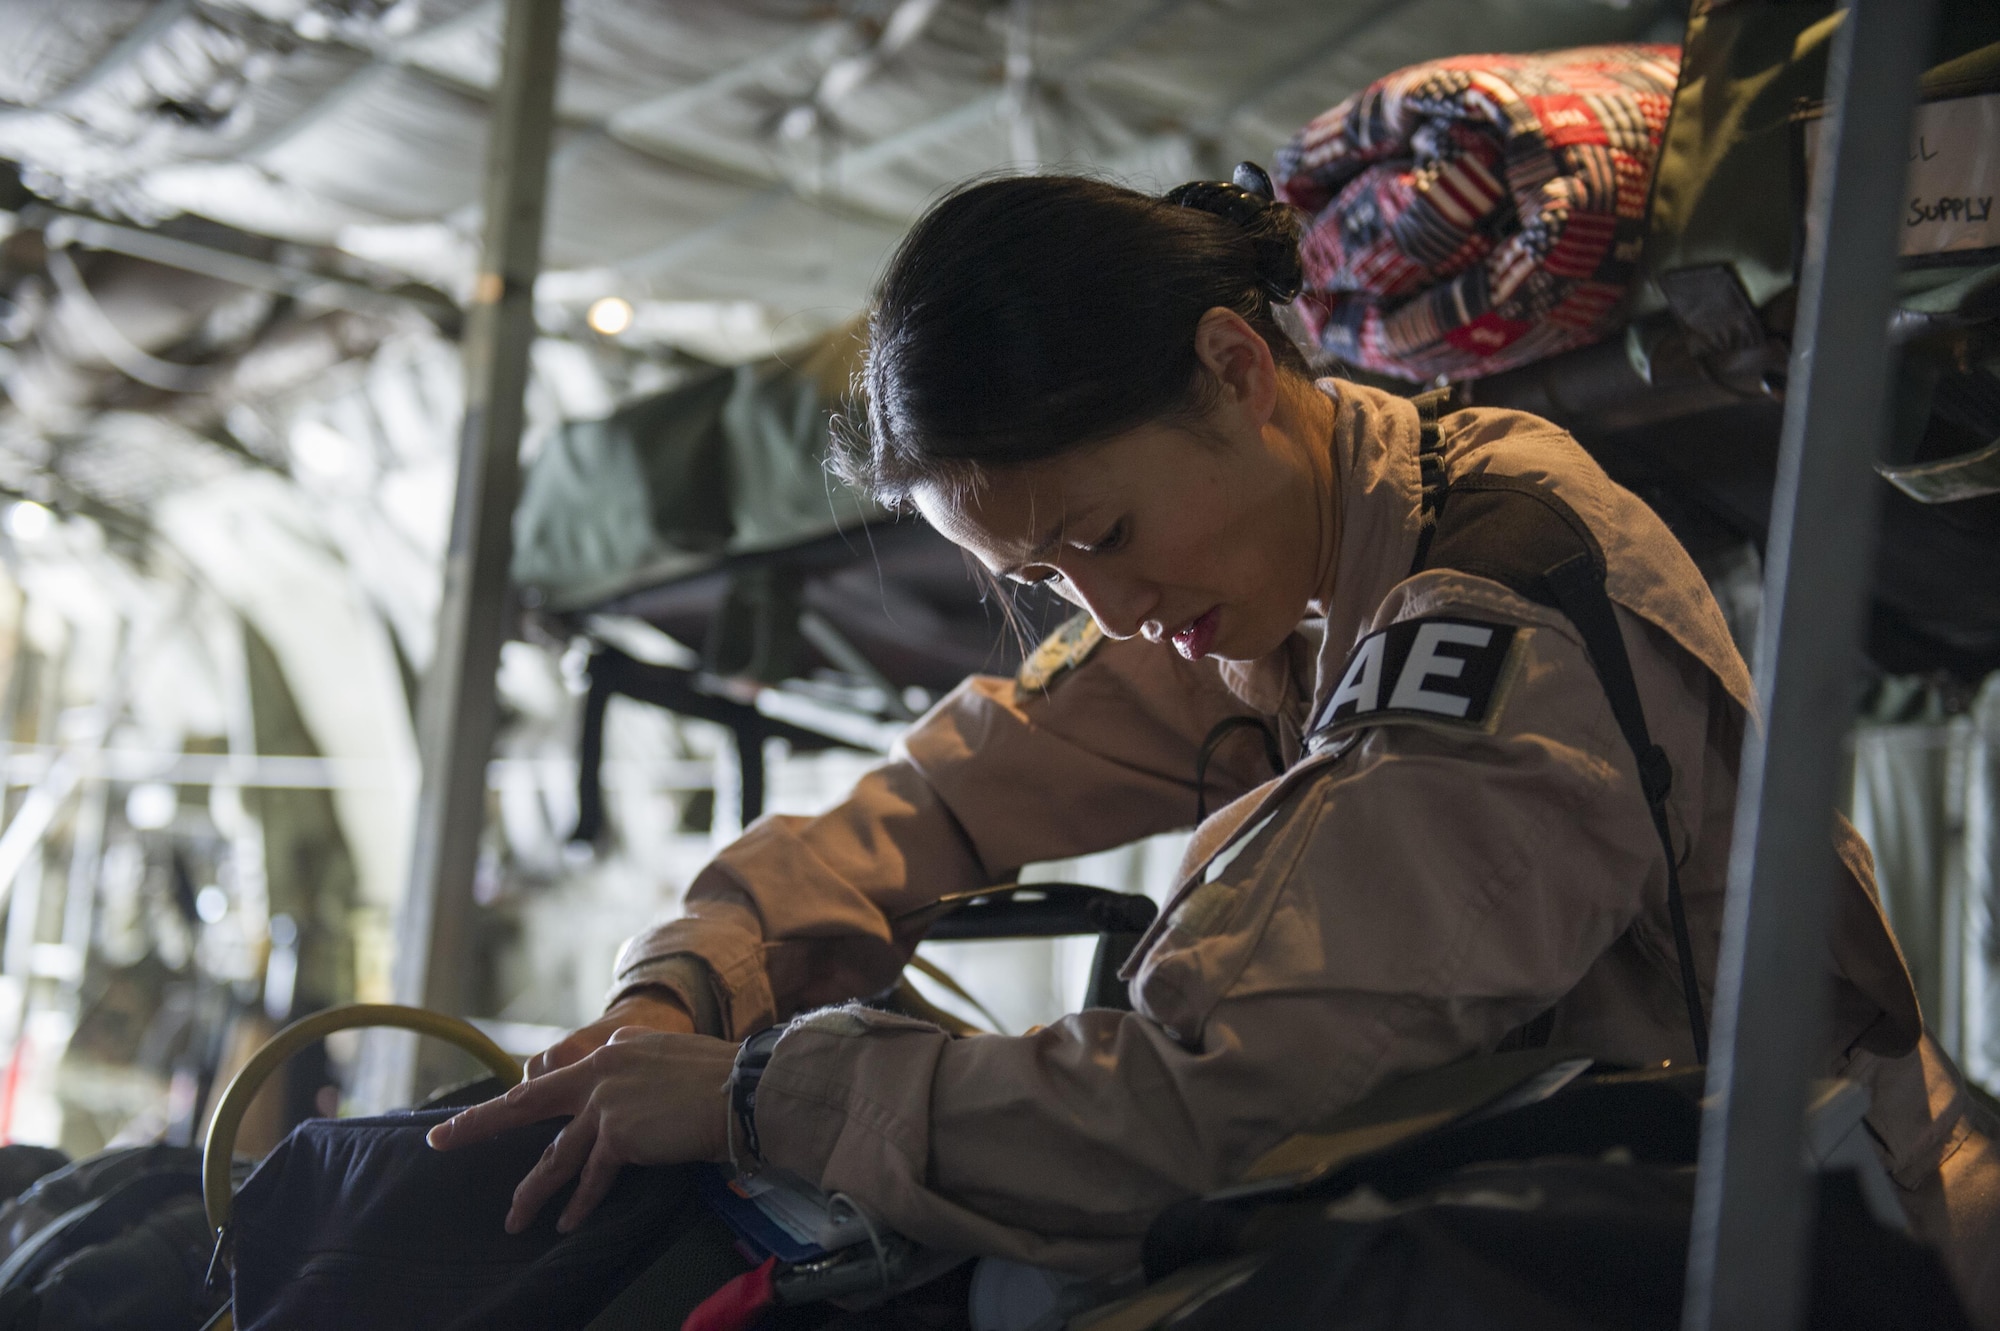 Tech. Sgt. Audrey Belmonte, 455th Expeditionary Aeromedical Evacuation Squadron medical technician deployed from the 167th AES at Charleston Air National Guard Base, W.Va., checks medical gear aboard a C-130 Hercules in preparation for a medevac mission at Bagram Airfield, Afghanistan, Nov. 6, 2015. The 455th EAES is tasked with moving injured and sick patients to locations with higher levels of medical care. (U.S. Air Force photo by Tech. Sgt. Robert Cloys/RELEASED)